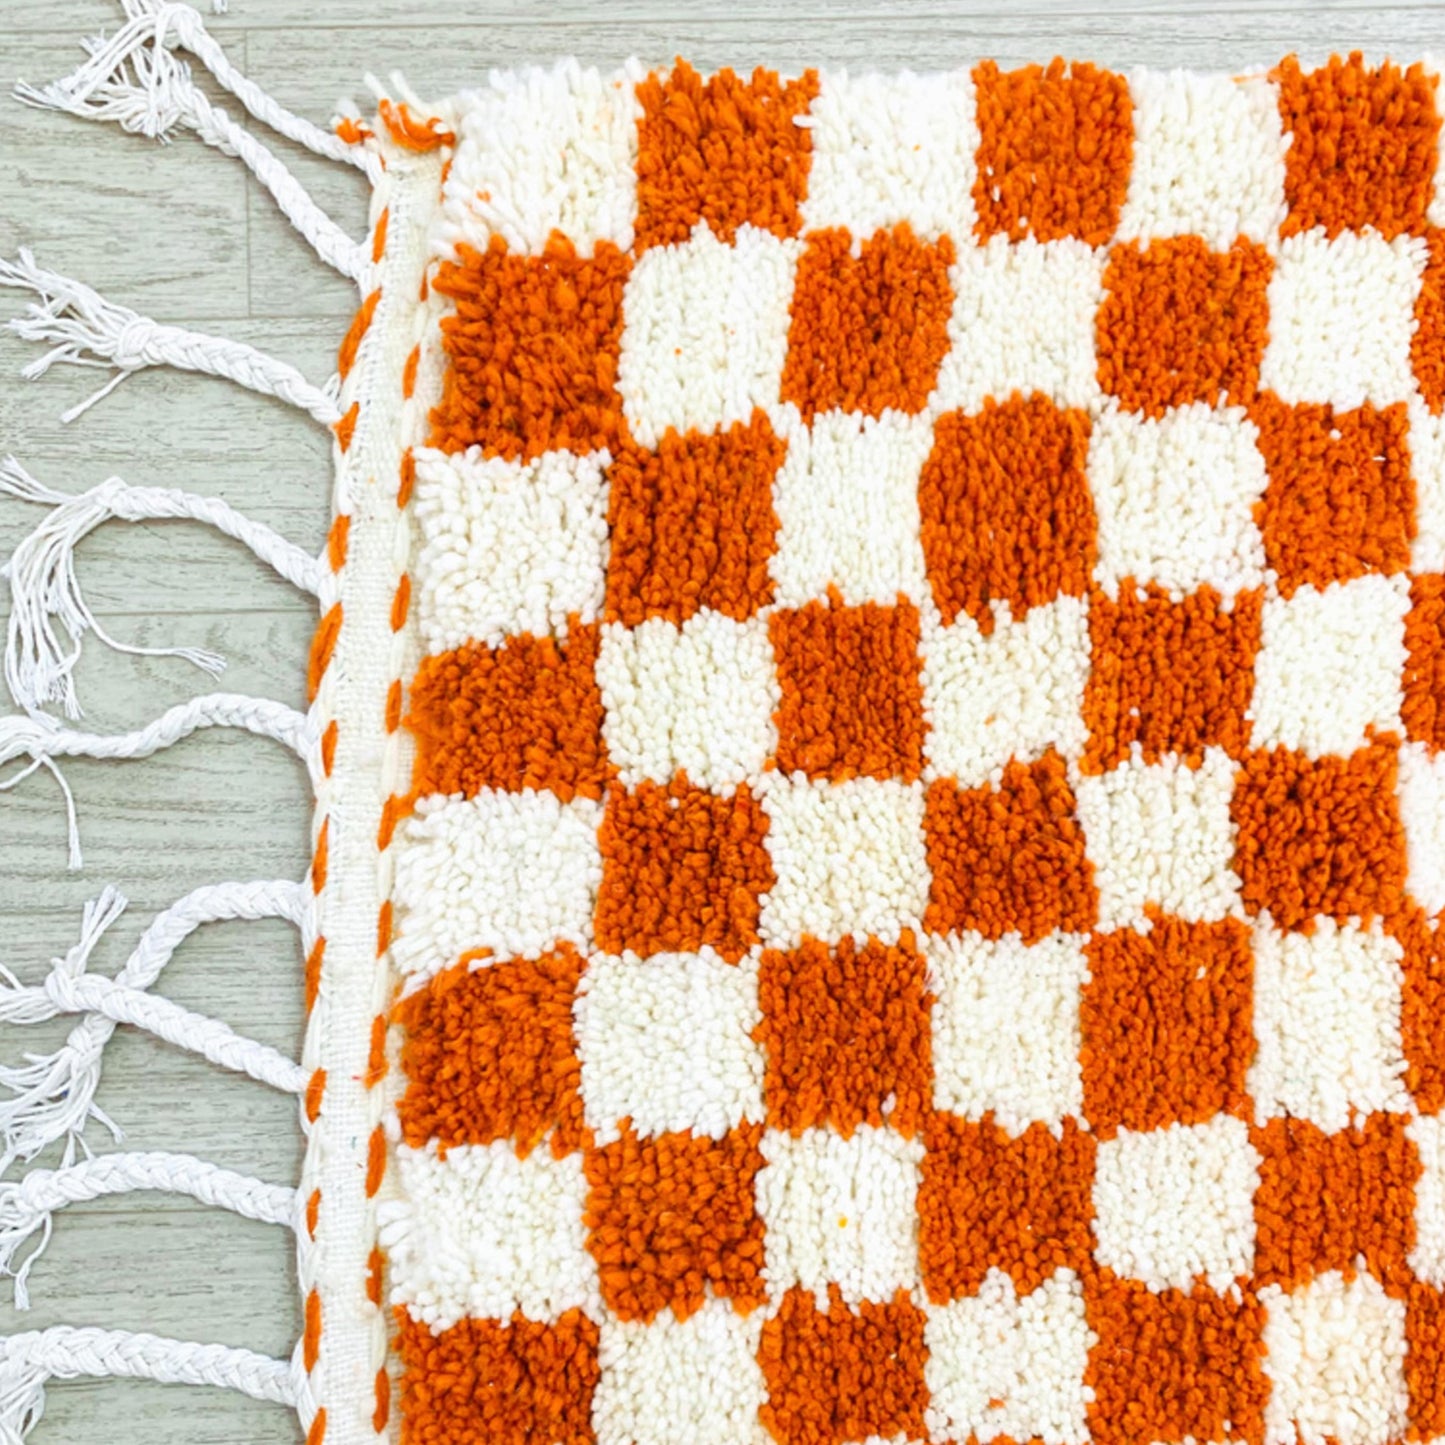 TASSELS-OF-CHECKERED-ORANGE-RED-MOROCCAN-RUG